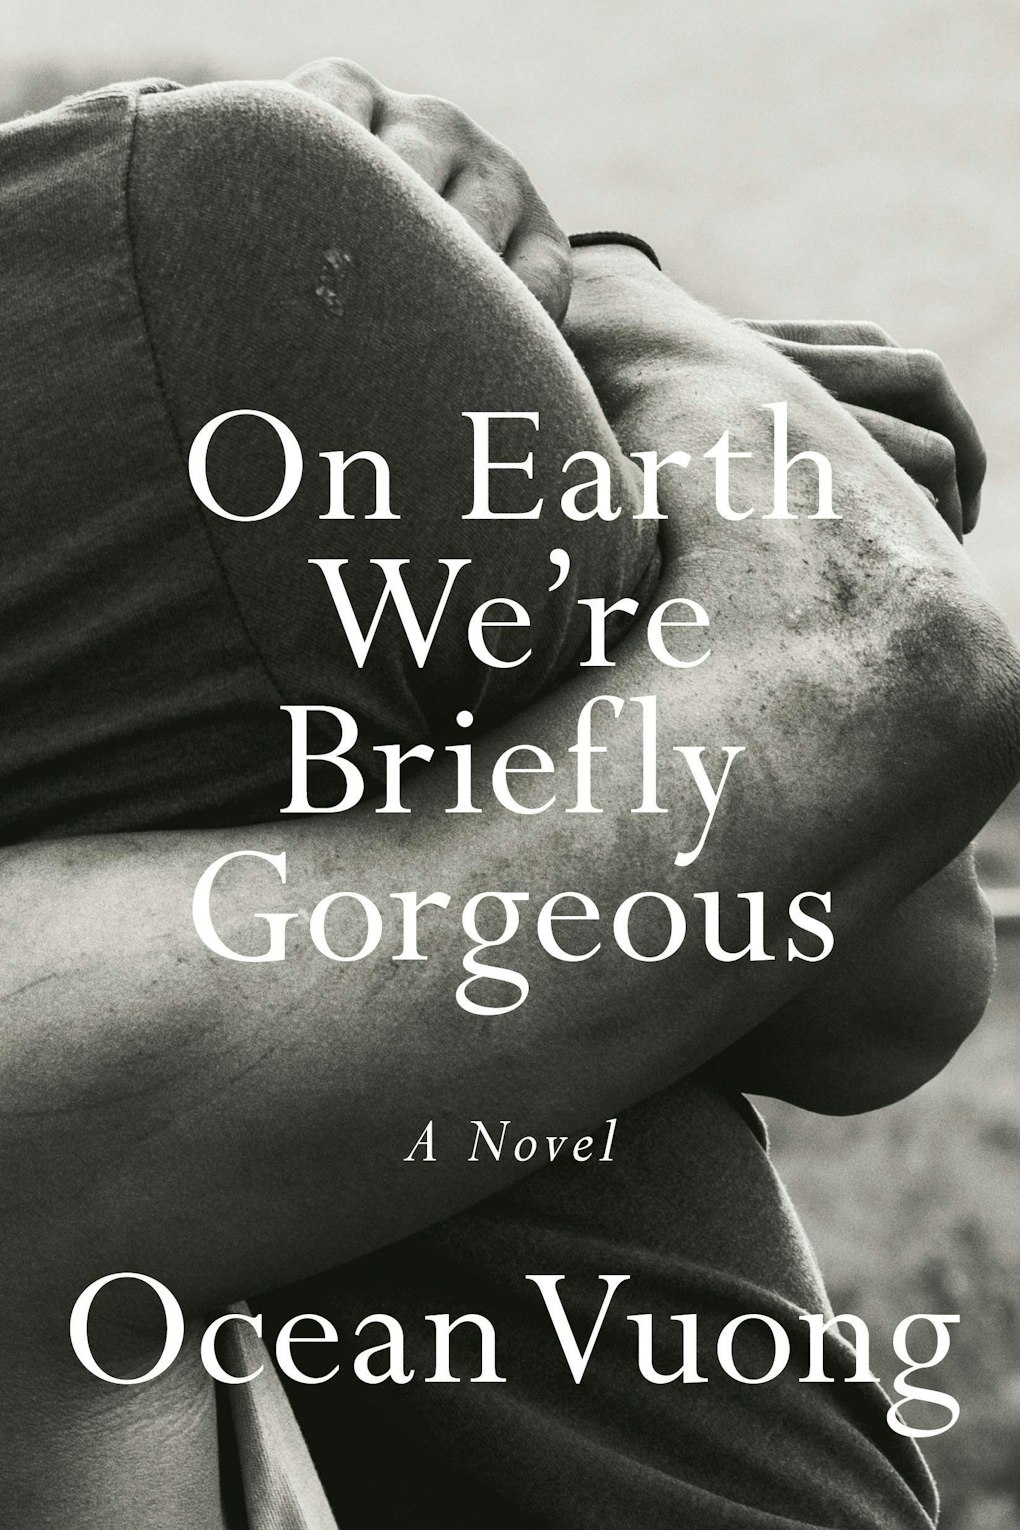 Tanya Hope Sex - On Earth We're Briefly Gorgeous by Ocean Vuong â€“ The Brooklyn Rail